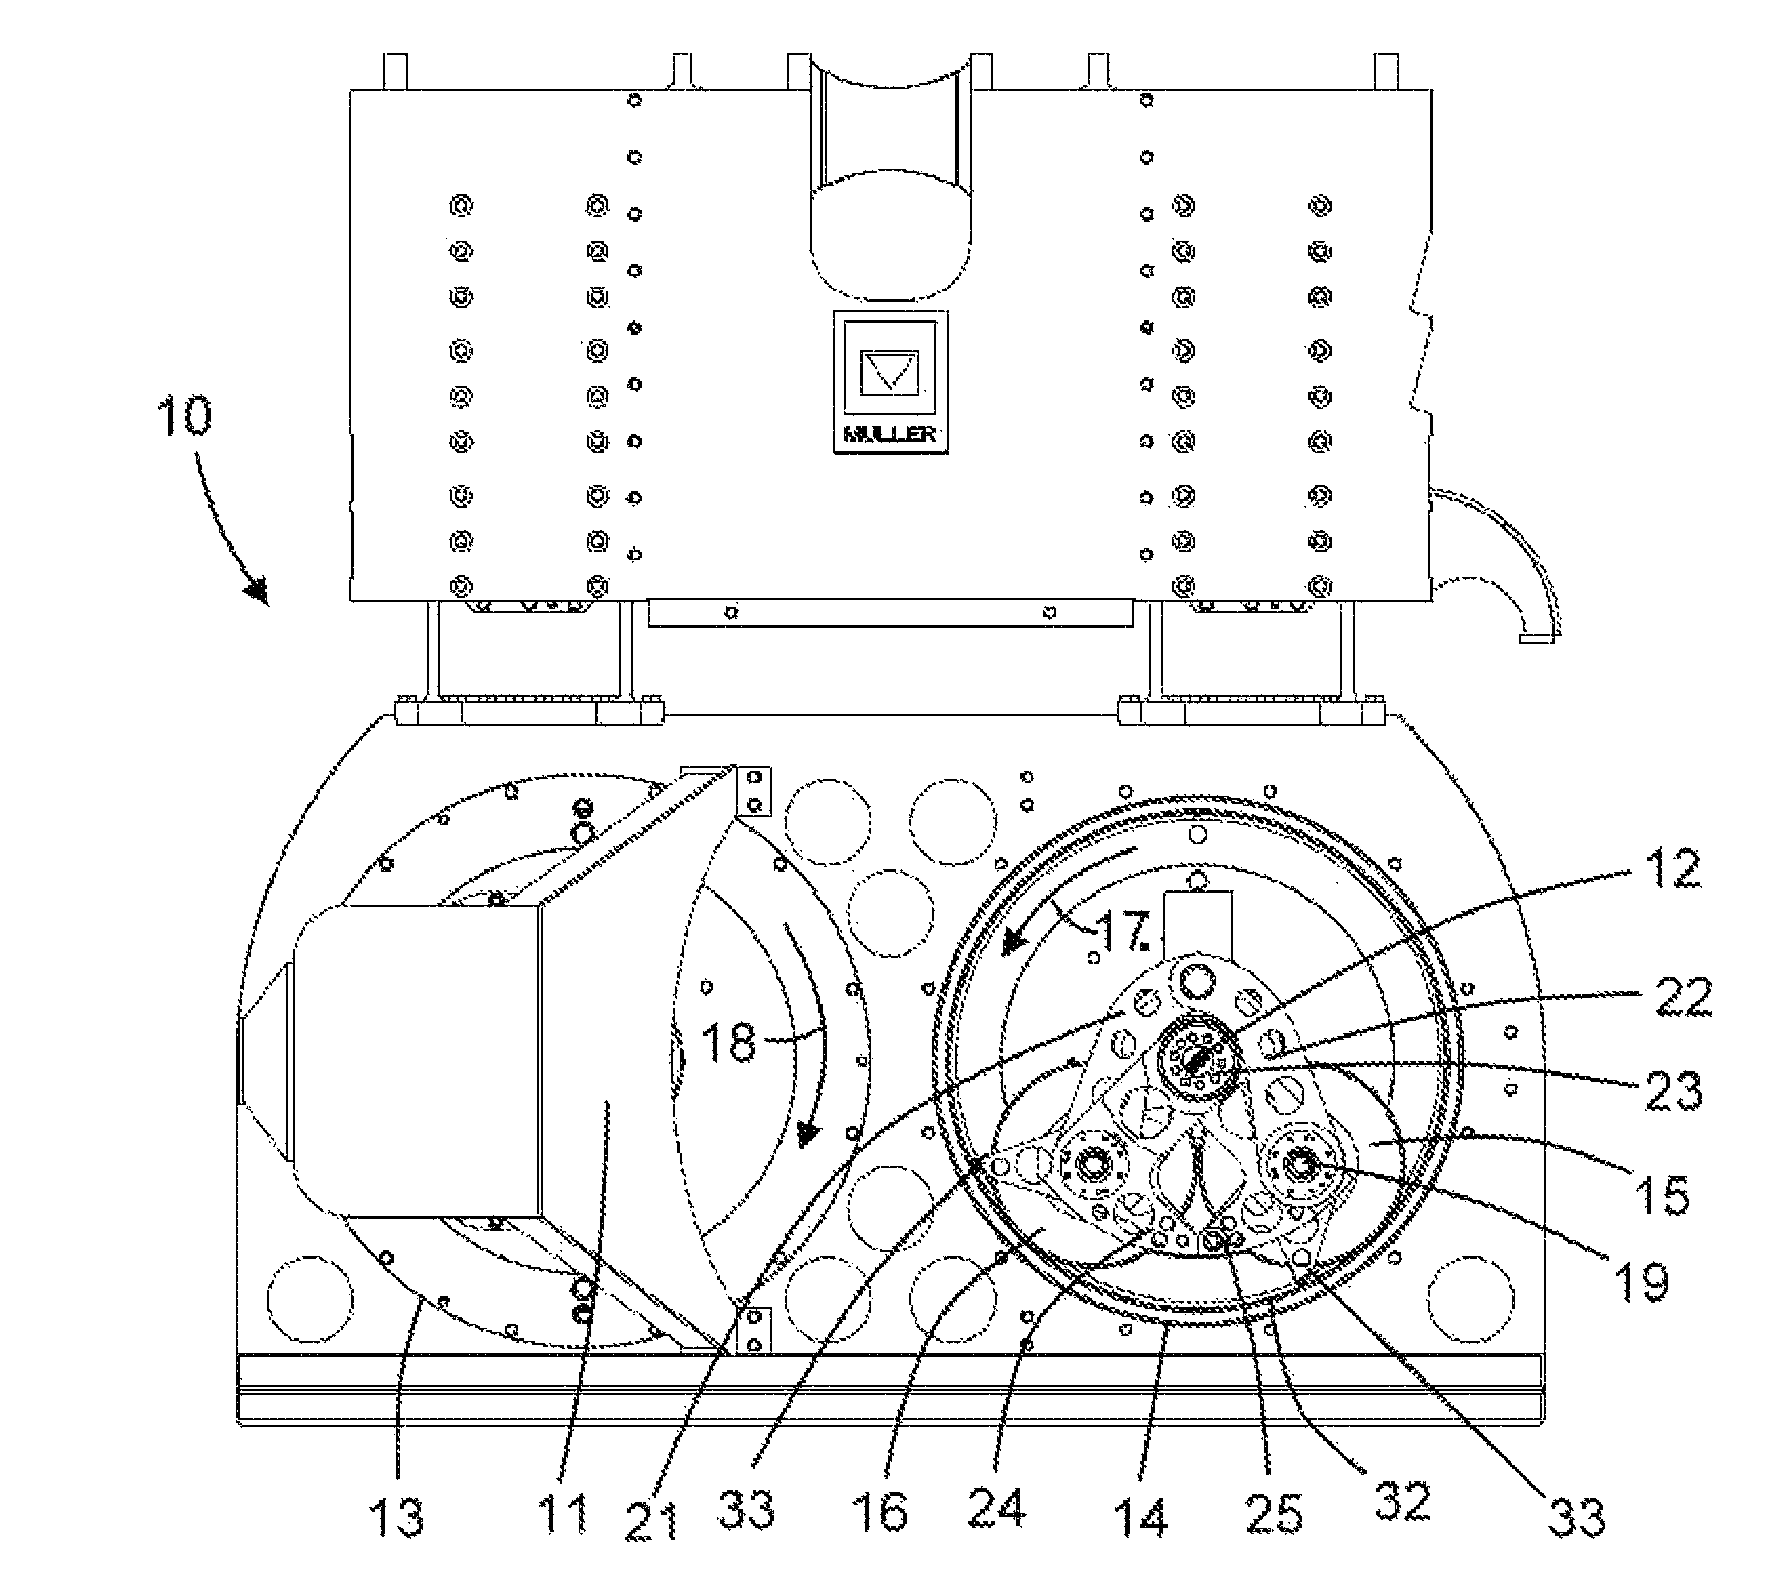 Device for producing vibrations